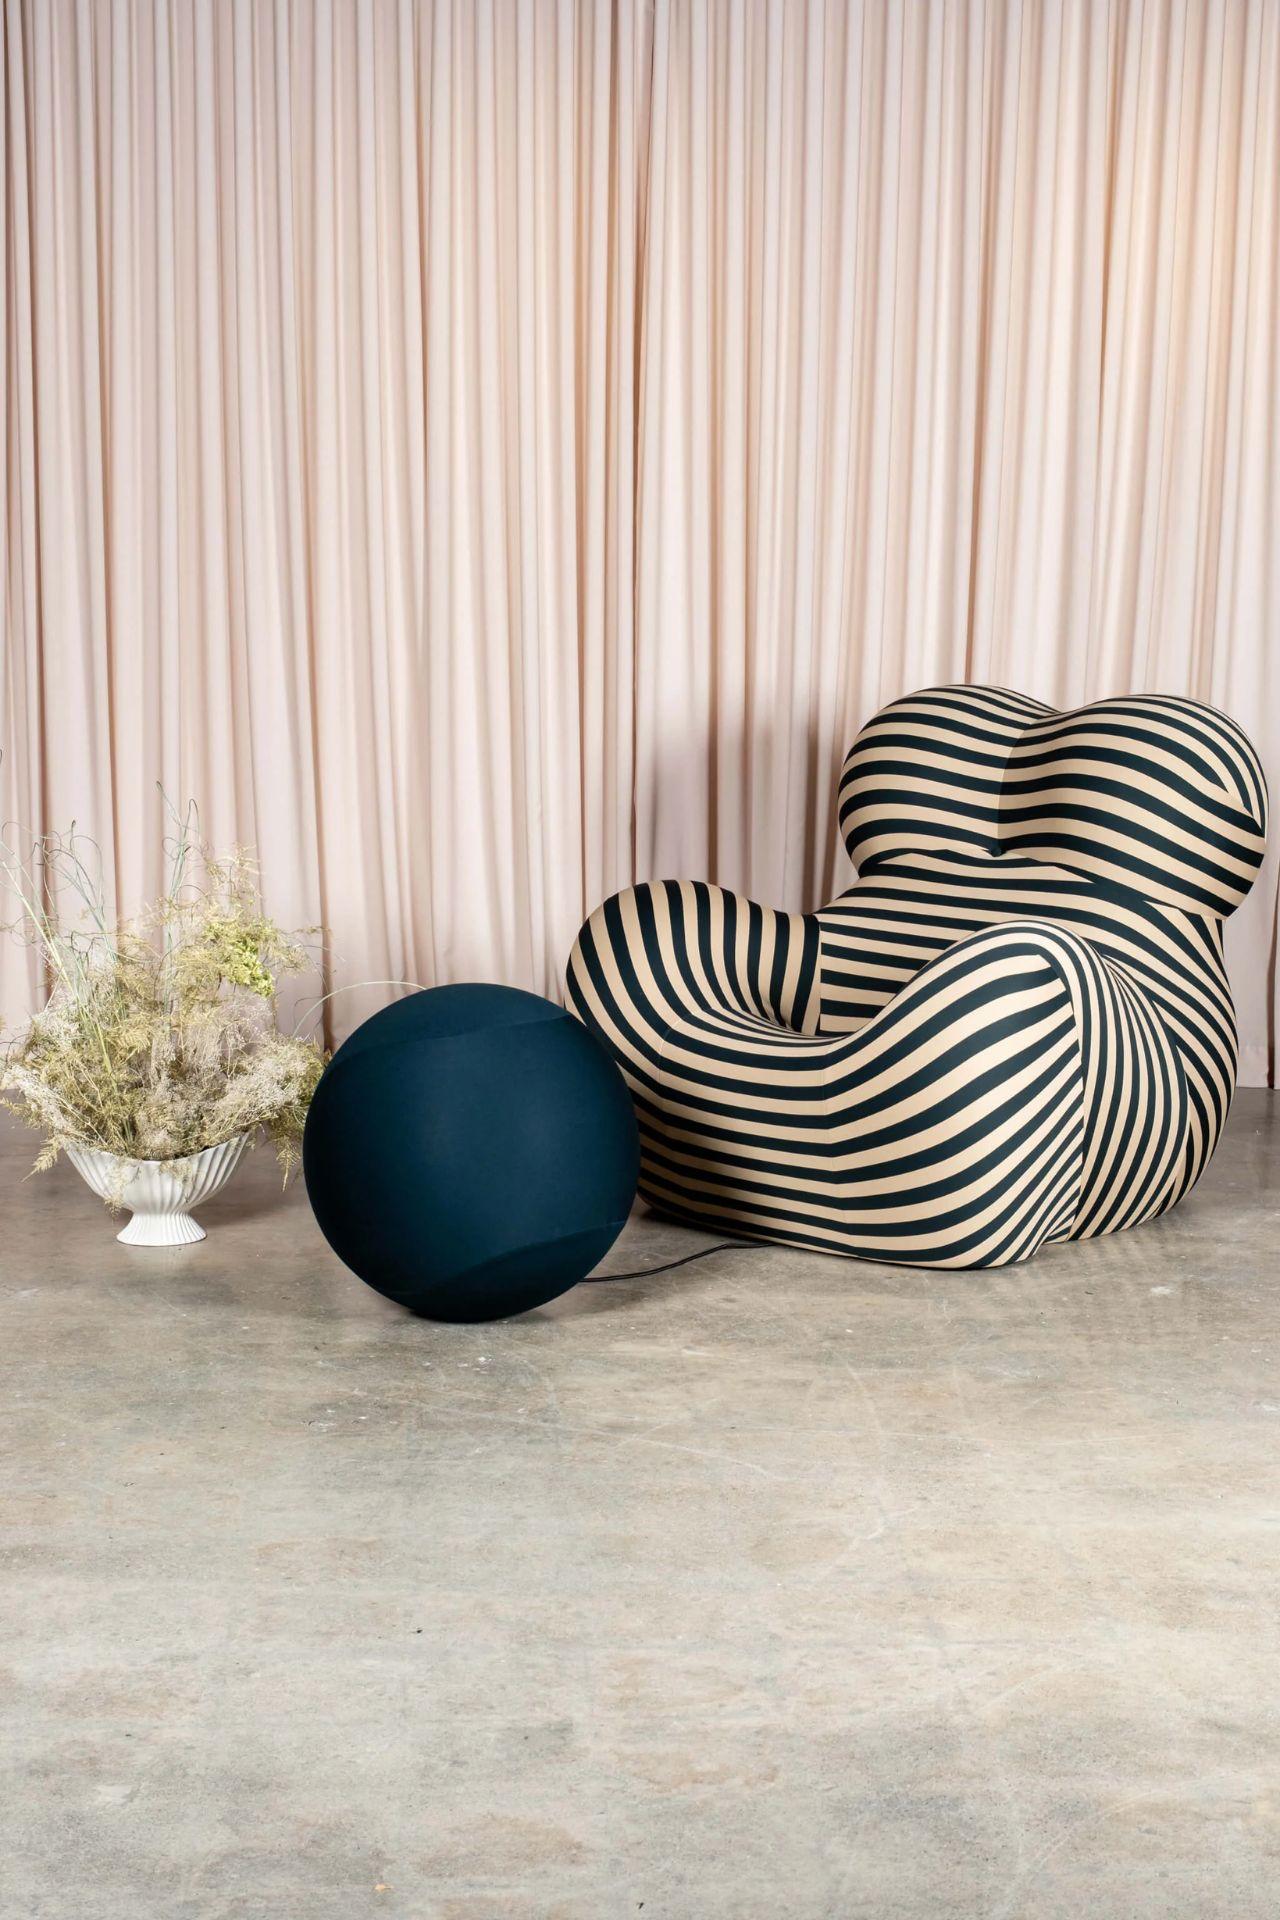 Since its first appearance, the Up Series, designed in 1969 by Gaetano Pesce, has been one of the most talked about examples of modern furniture design. The exceptional visual impact of six models of ball-like seats in various sizes, entirely made